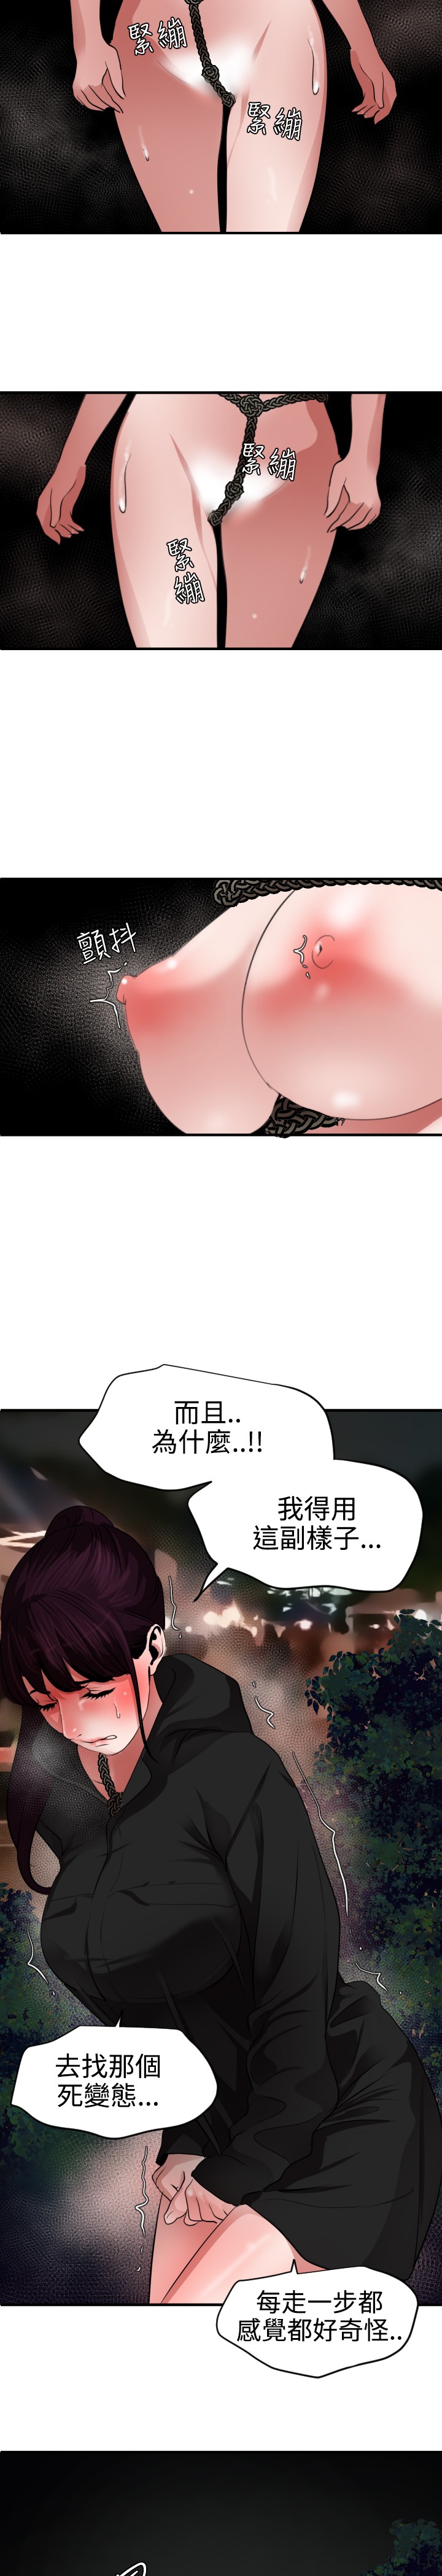 Desire King 欲求王 Ch.41~52 [Chinese] [黑嘿嘿] 慾求王